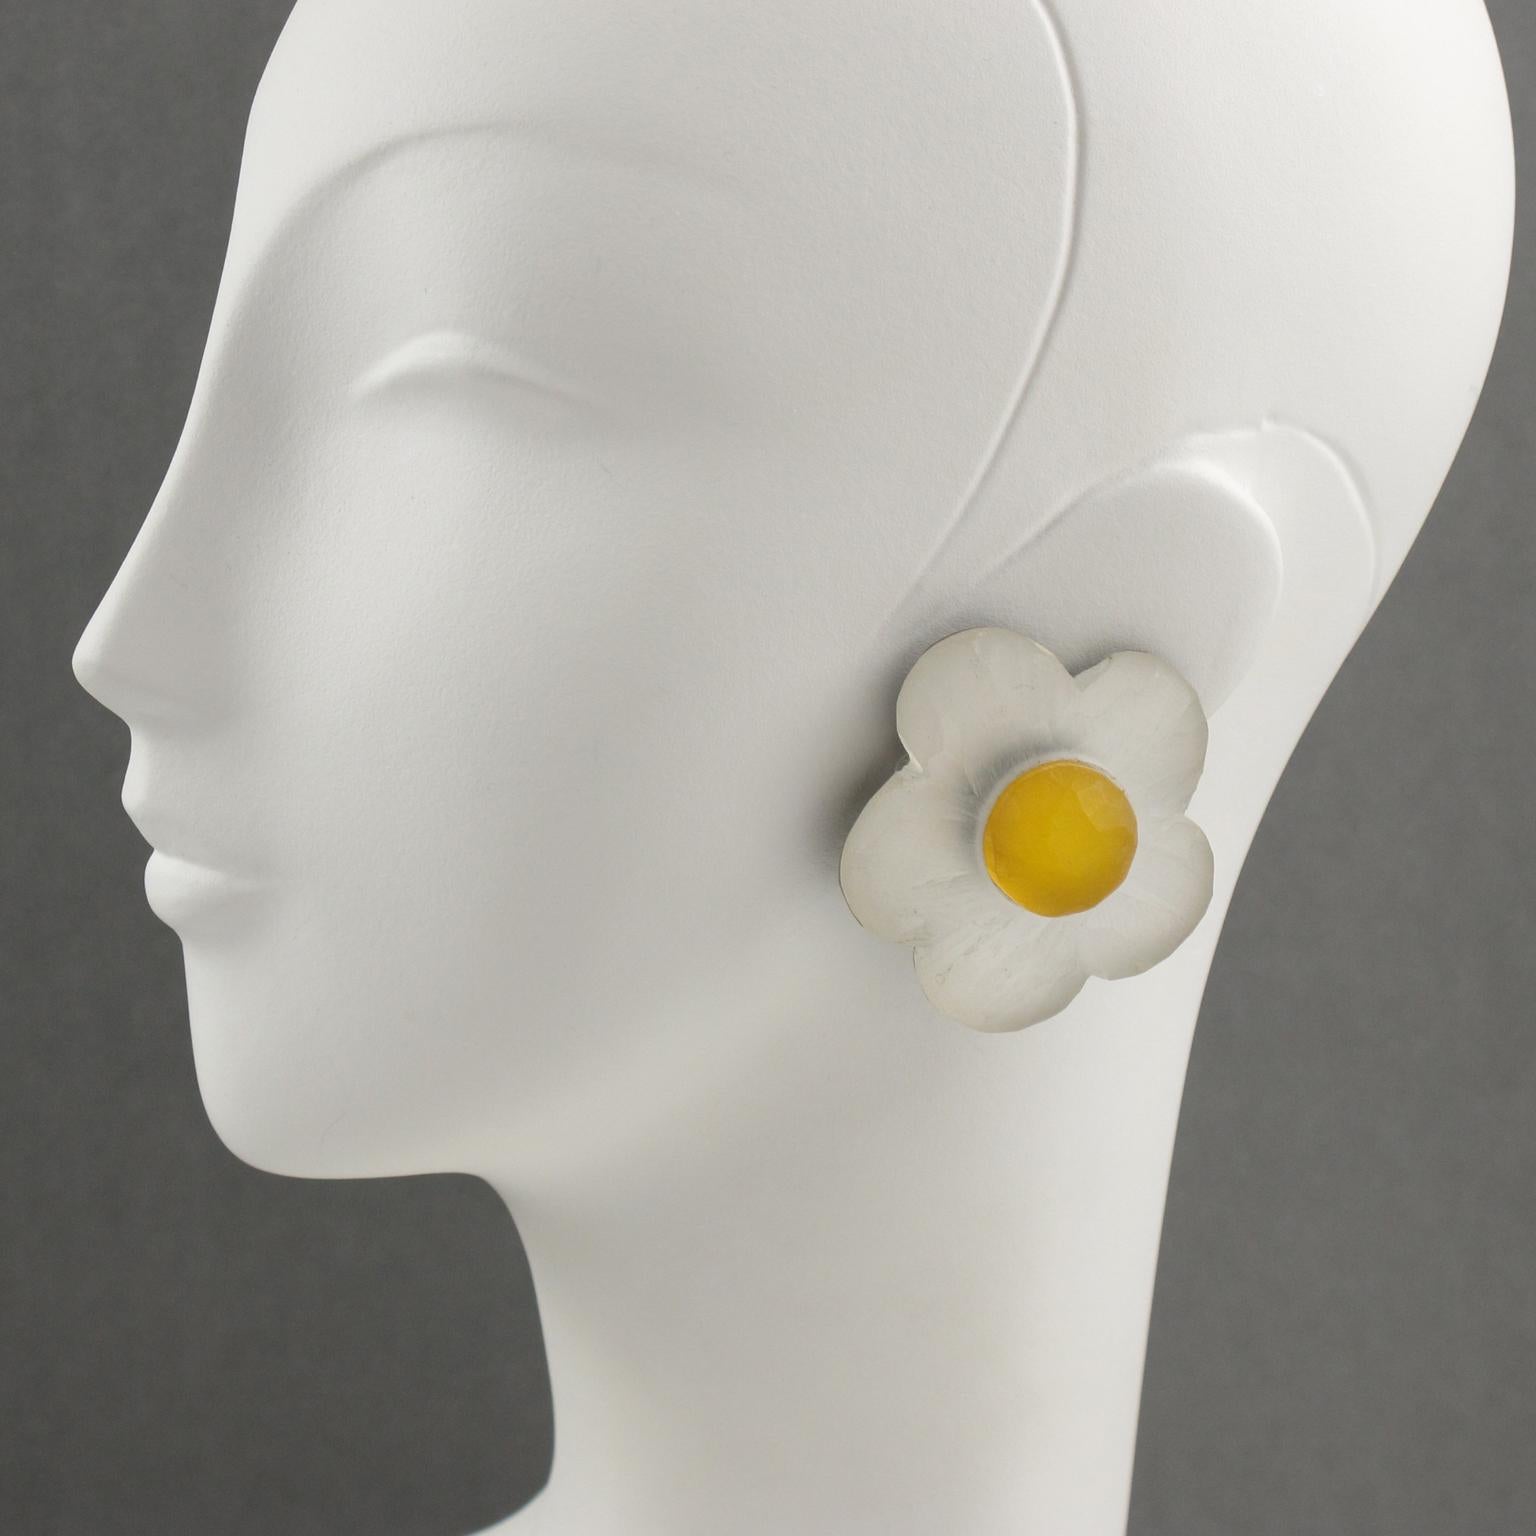 Gorgeous oversized frosted lucite clip-on earrings designed by Harriet Bauknight for Kaso. Dimensional shape all carved and textured featuring a daisy flower in frosted white and yellow colors. Signed at the back with the Kaso brand sticker